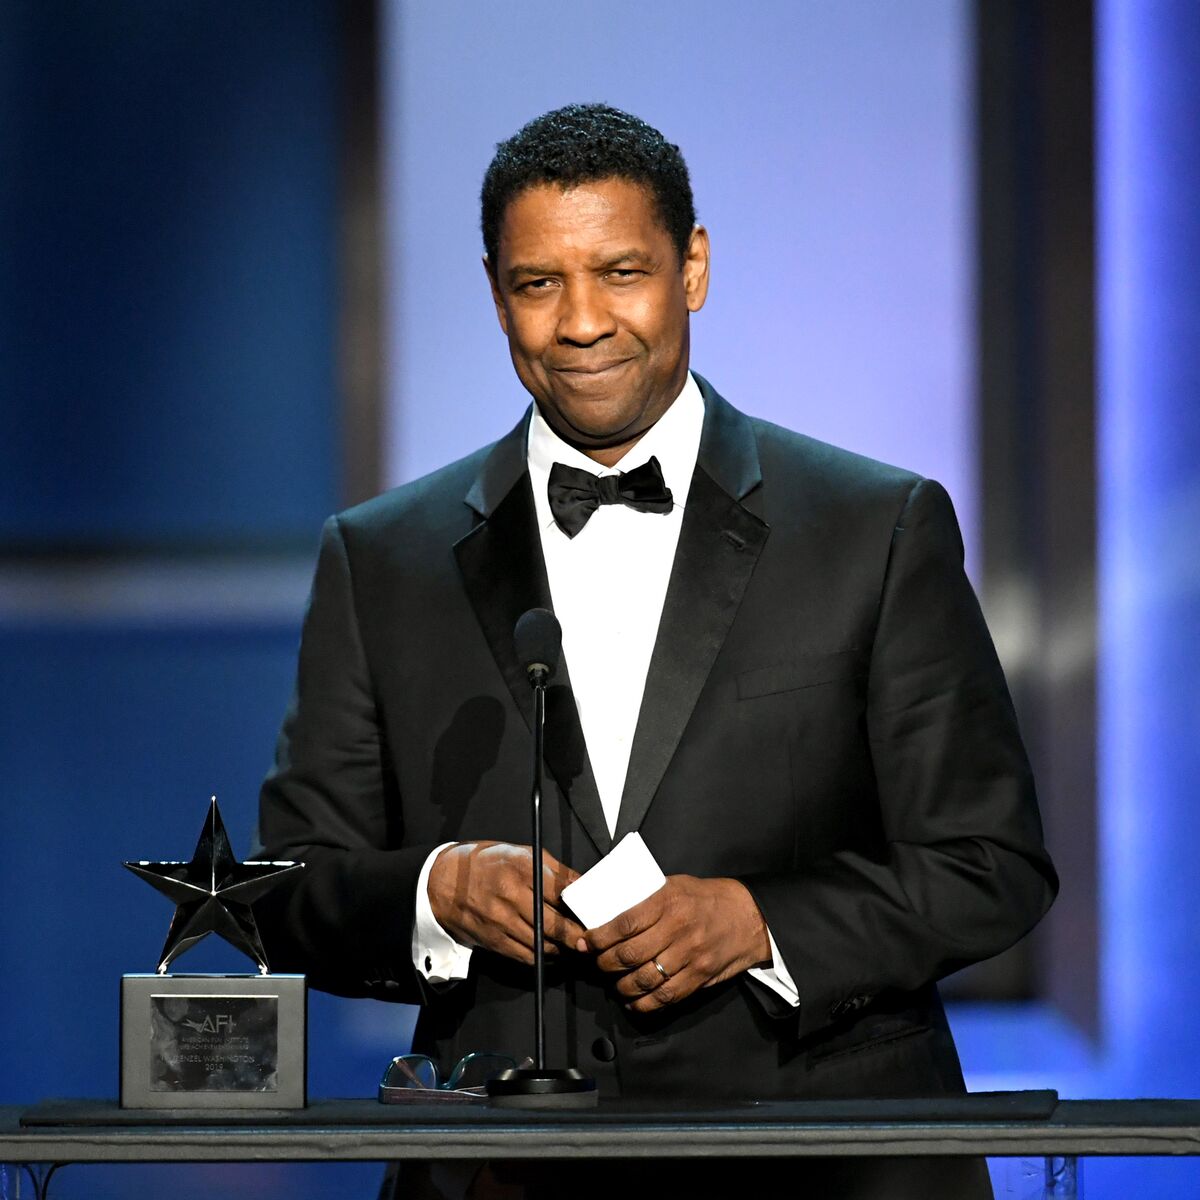 Denzel Washington at the 47th AFI Life Achievement Award on June 06, 2019, in Hollywood, California | Photo: Kevin Winter/Getty Images